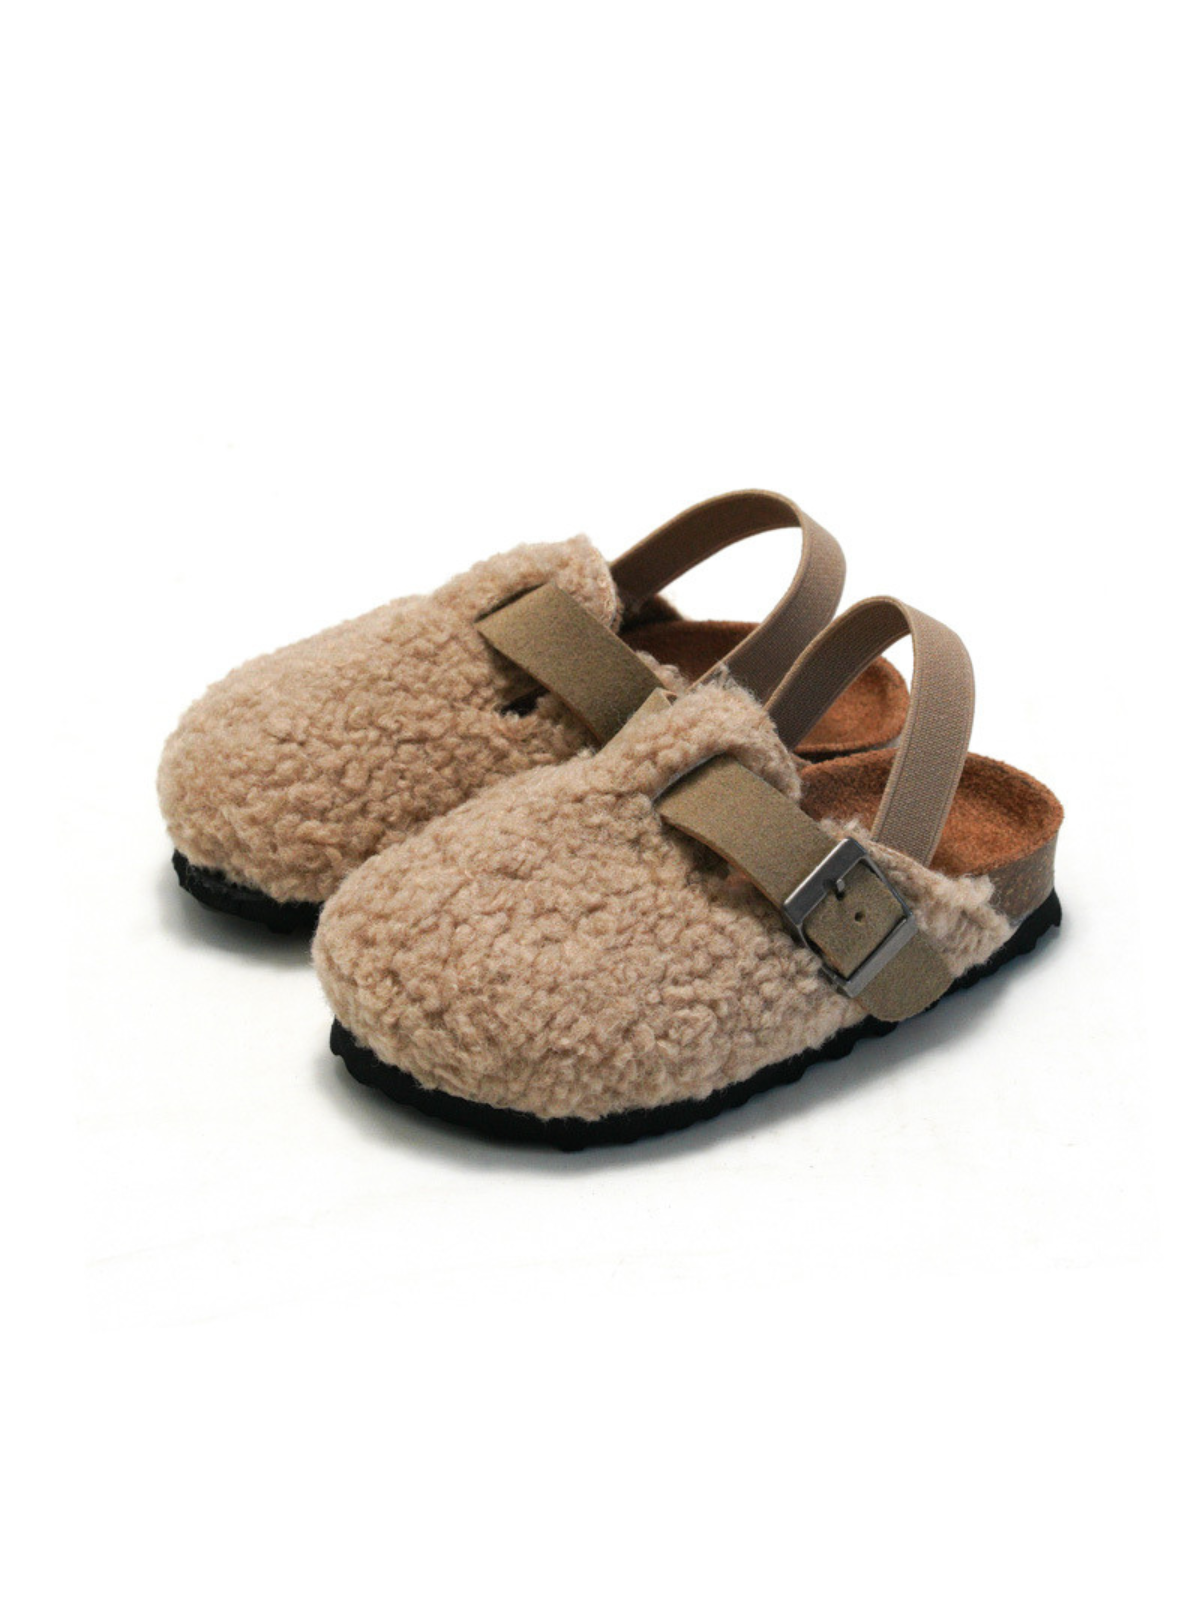 Shoes By Liv & Mia | Toddlers Wooly Loafers | Girls Boutique